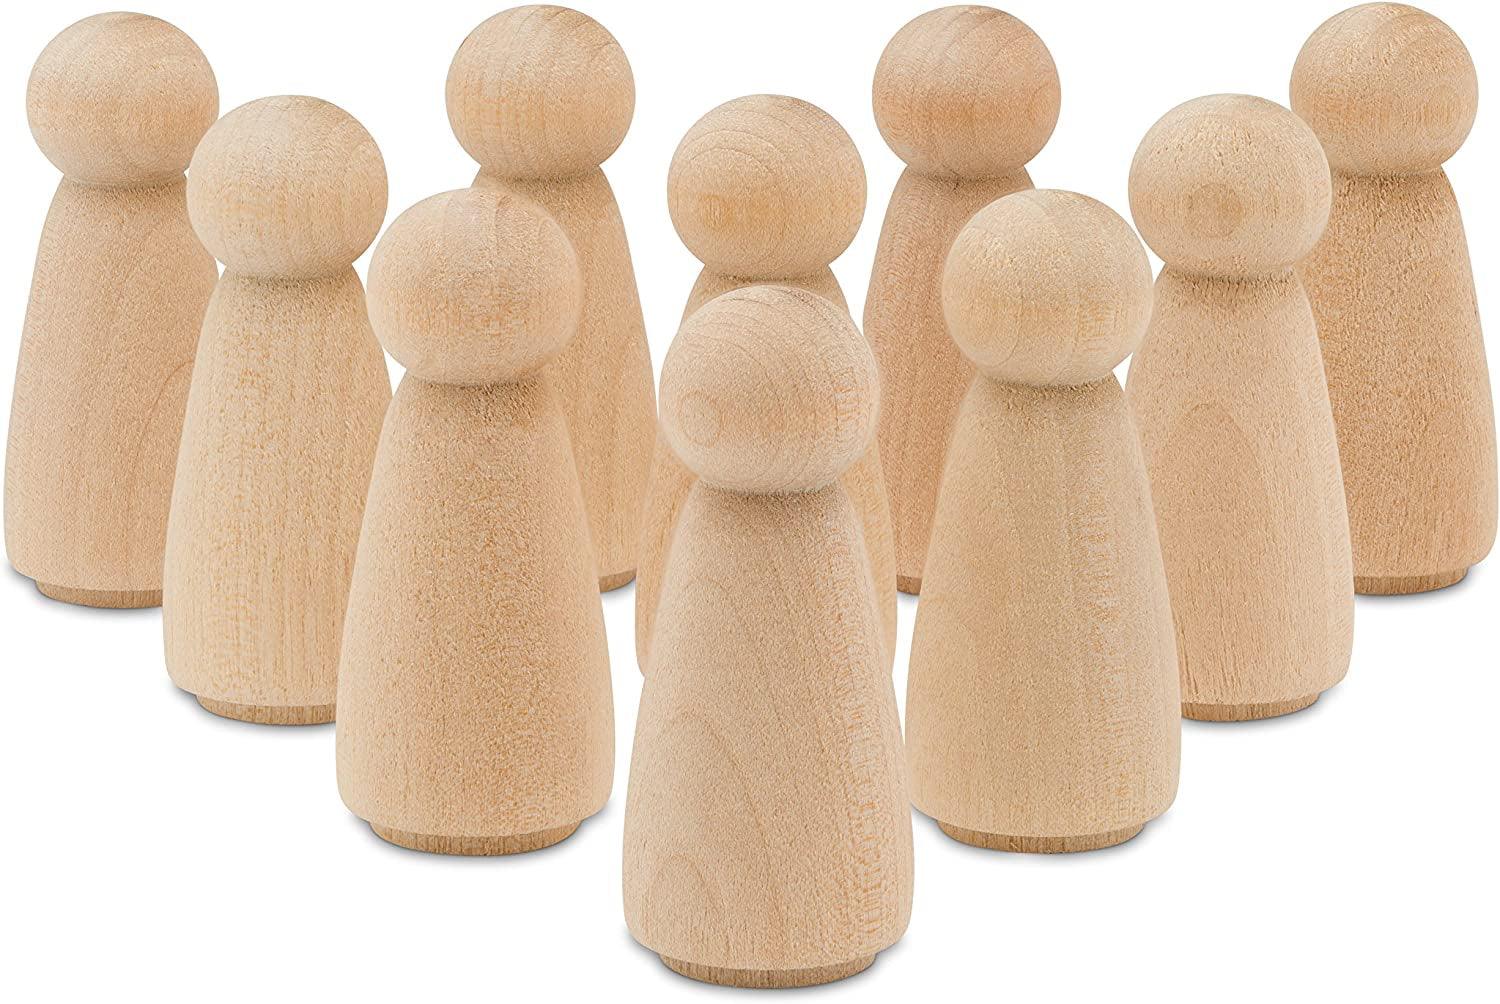 Wood Peg Dolls Unfinished 2 Inch, Mom/Angel Shape, Pack of 25 Birch Wooden Peg People for Crafting, Miniature Figures - WoodArtSupply